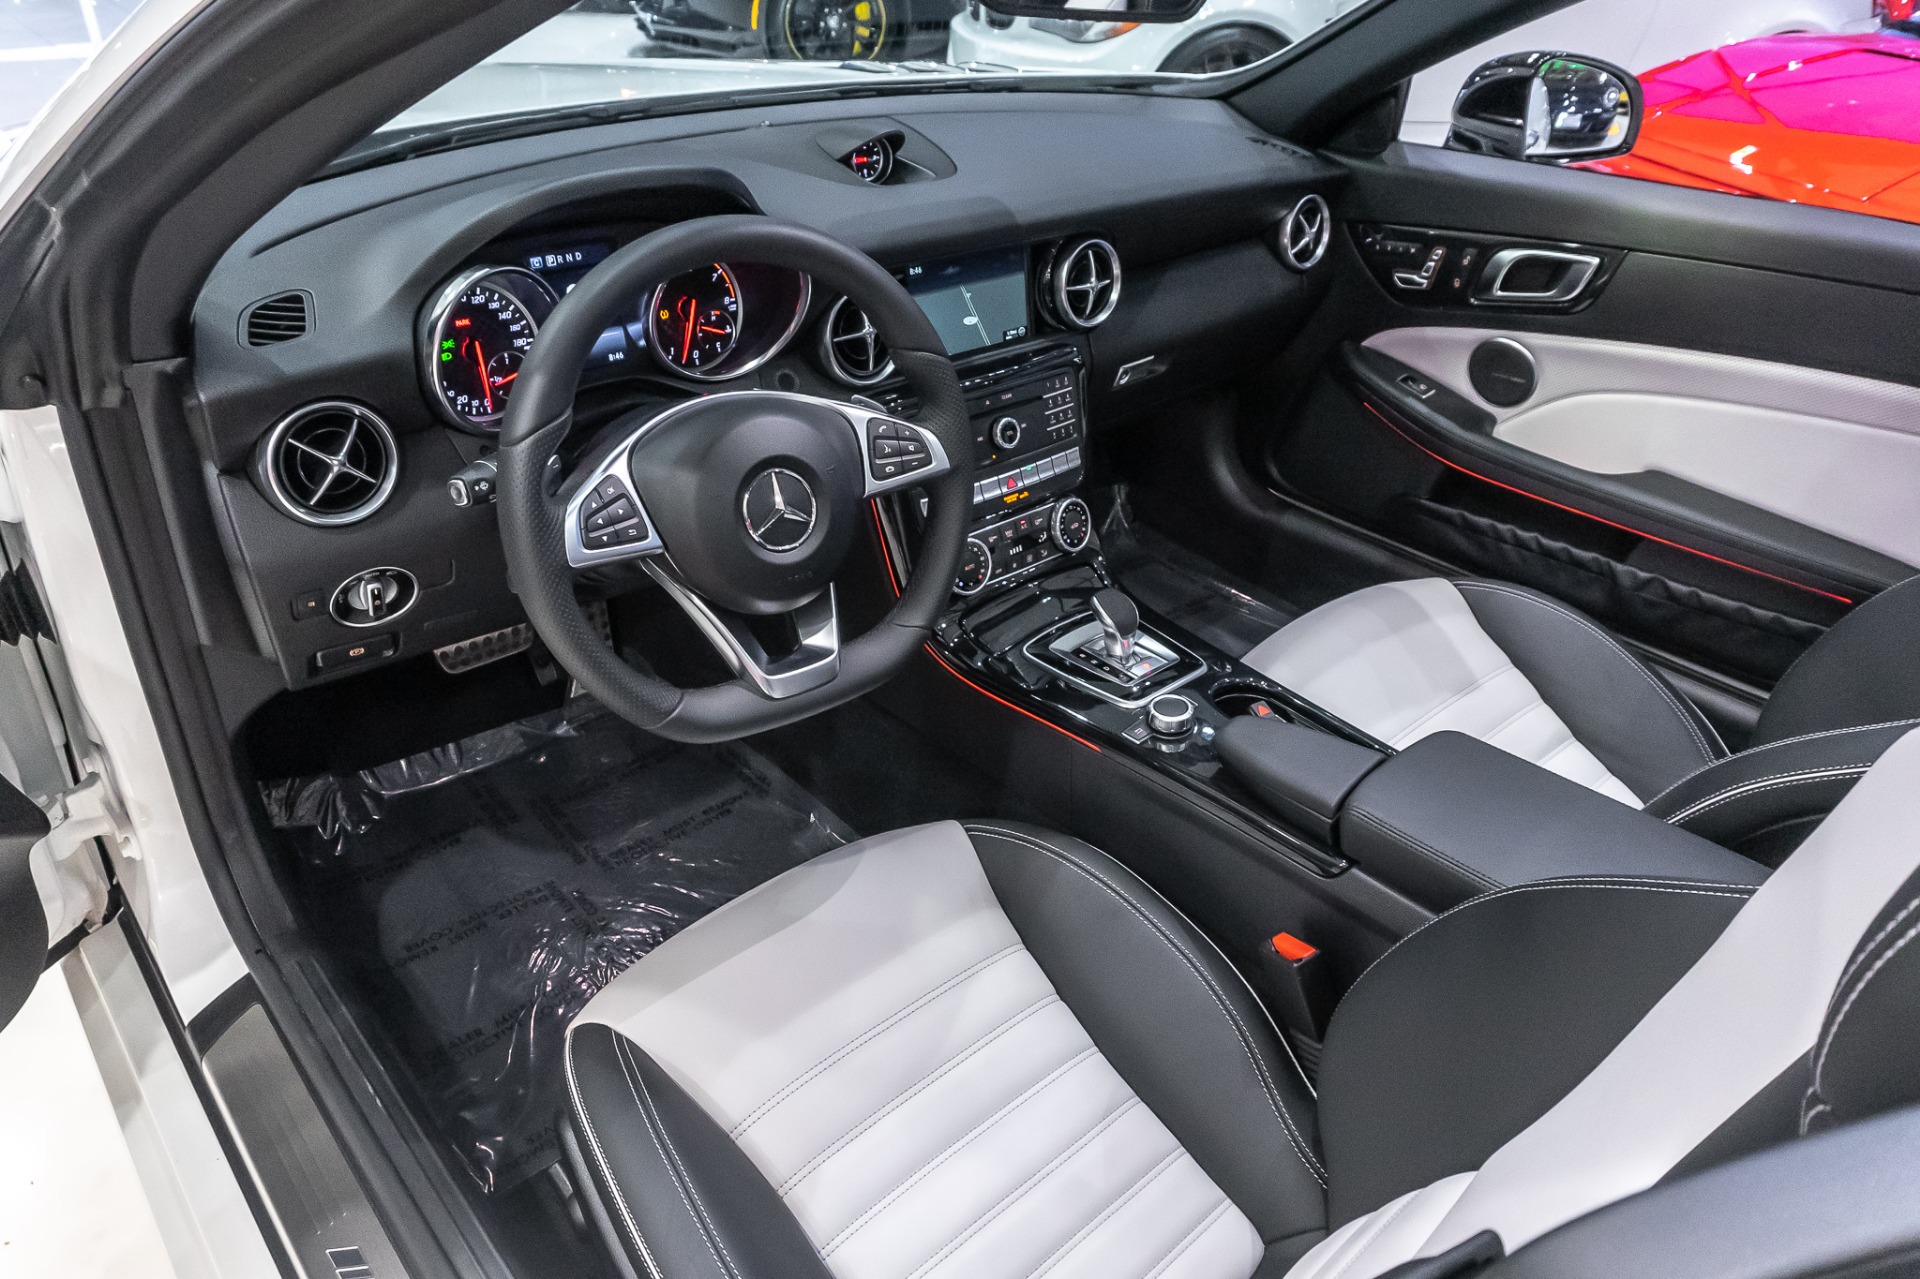 Used-2018-Mercedes-Benz-SLC43-AMG-Convertible-Pano-Roof